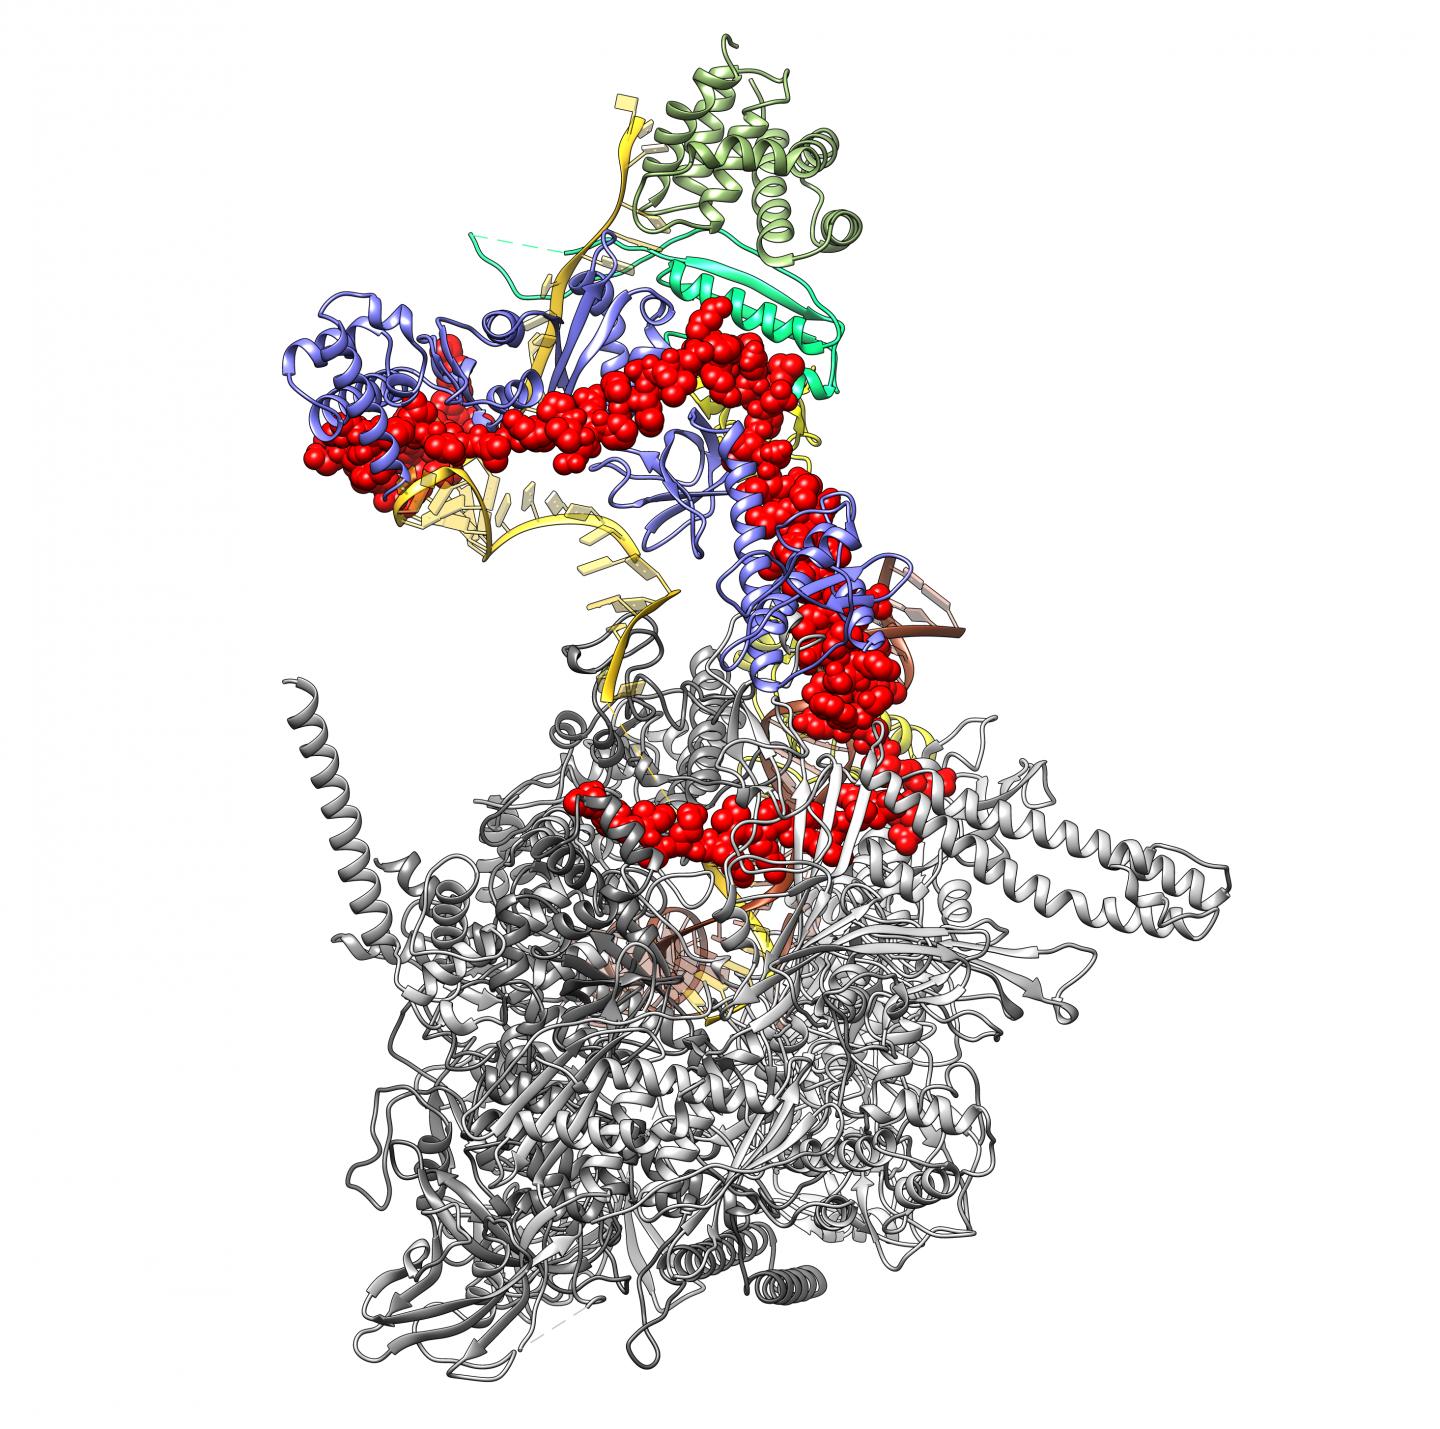 3D Structure of the Protein Complex